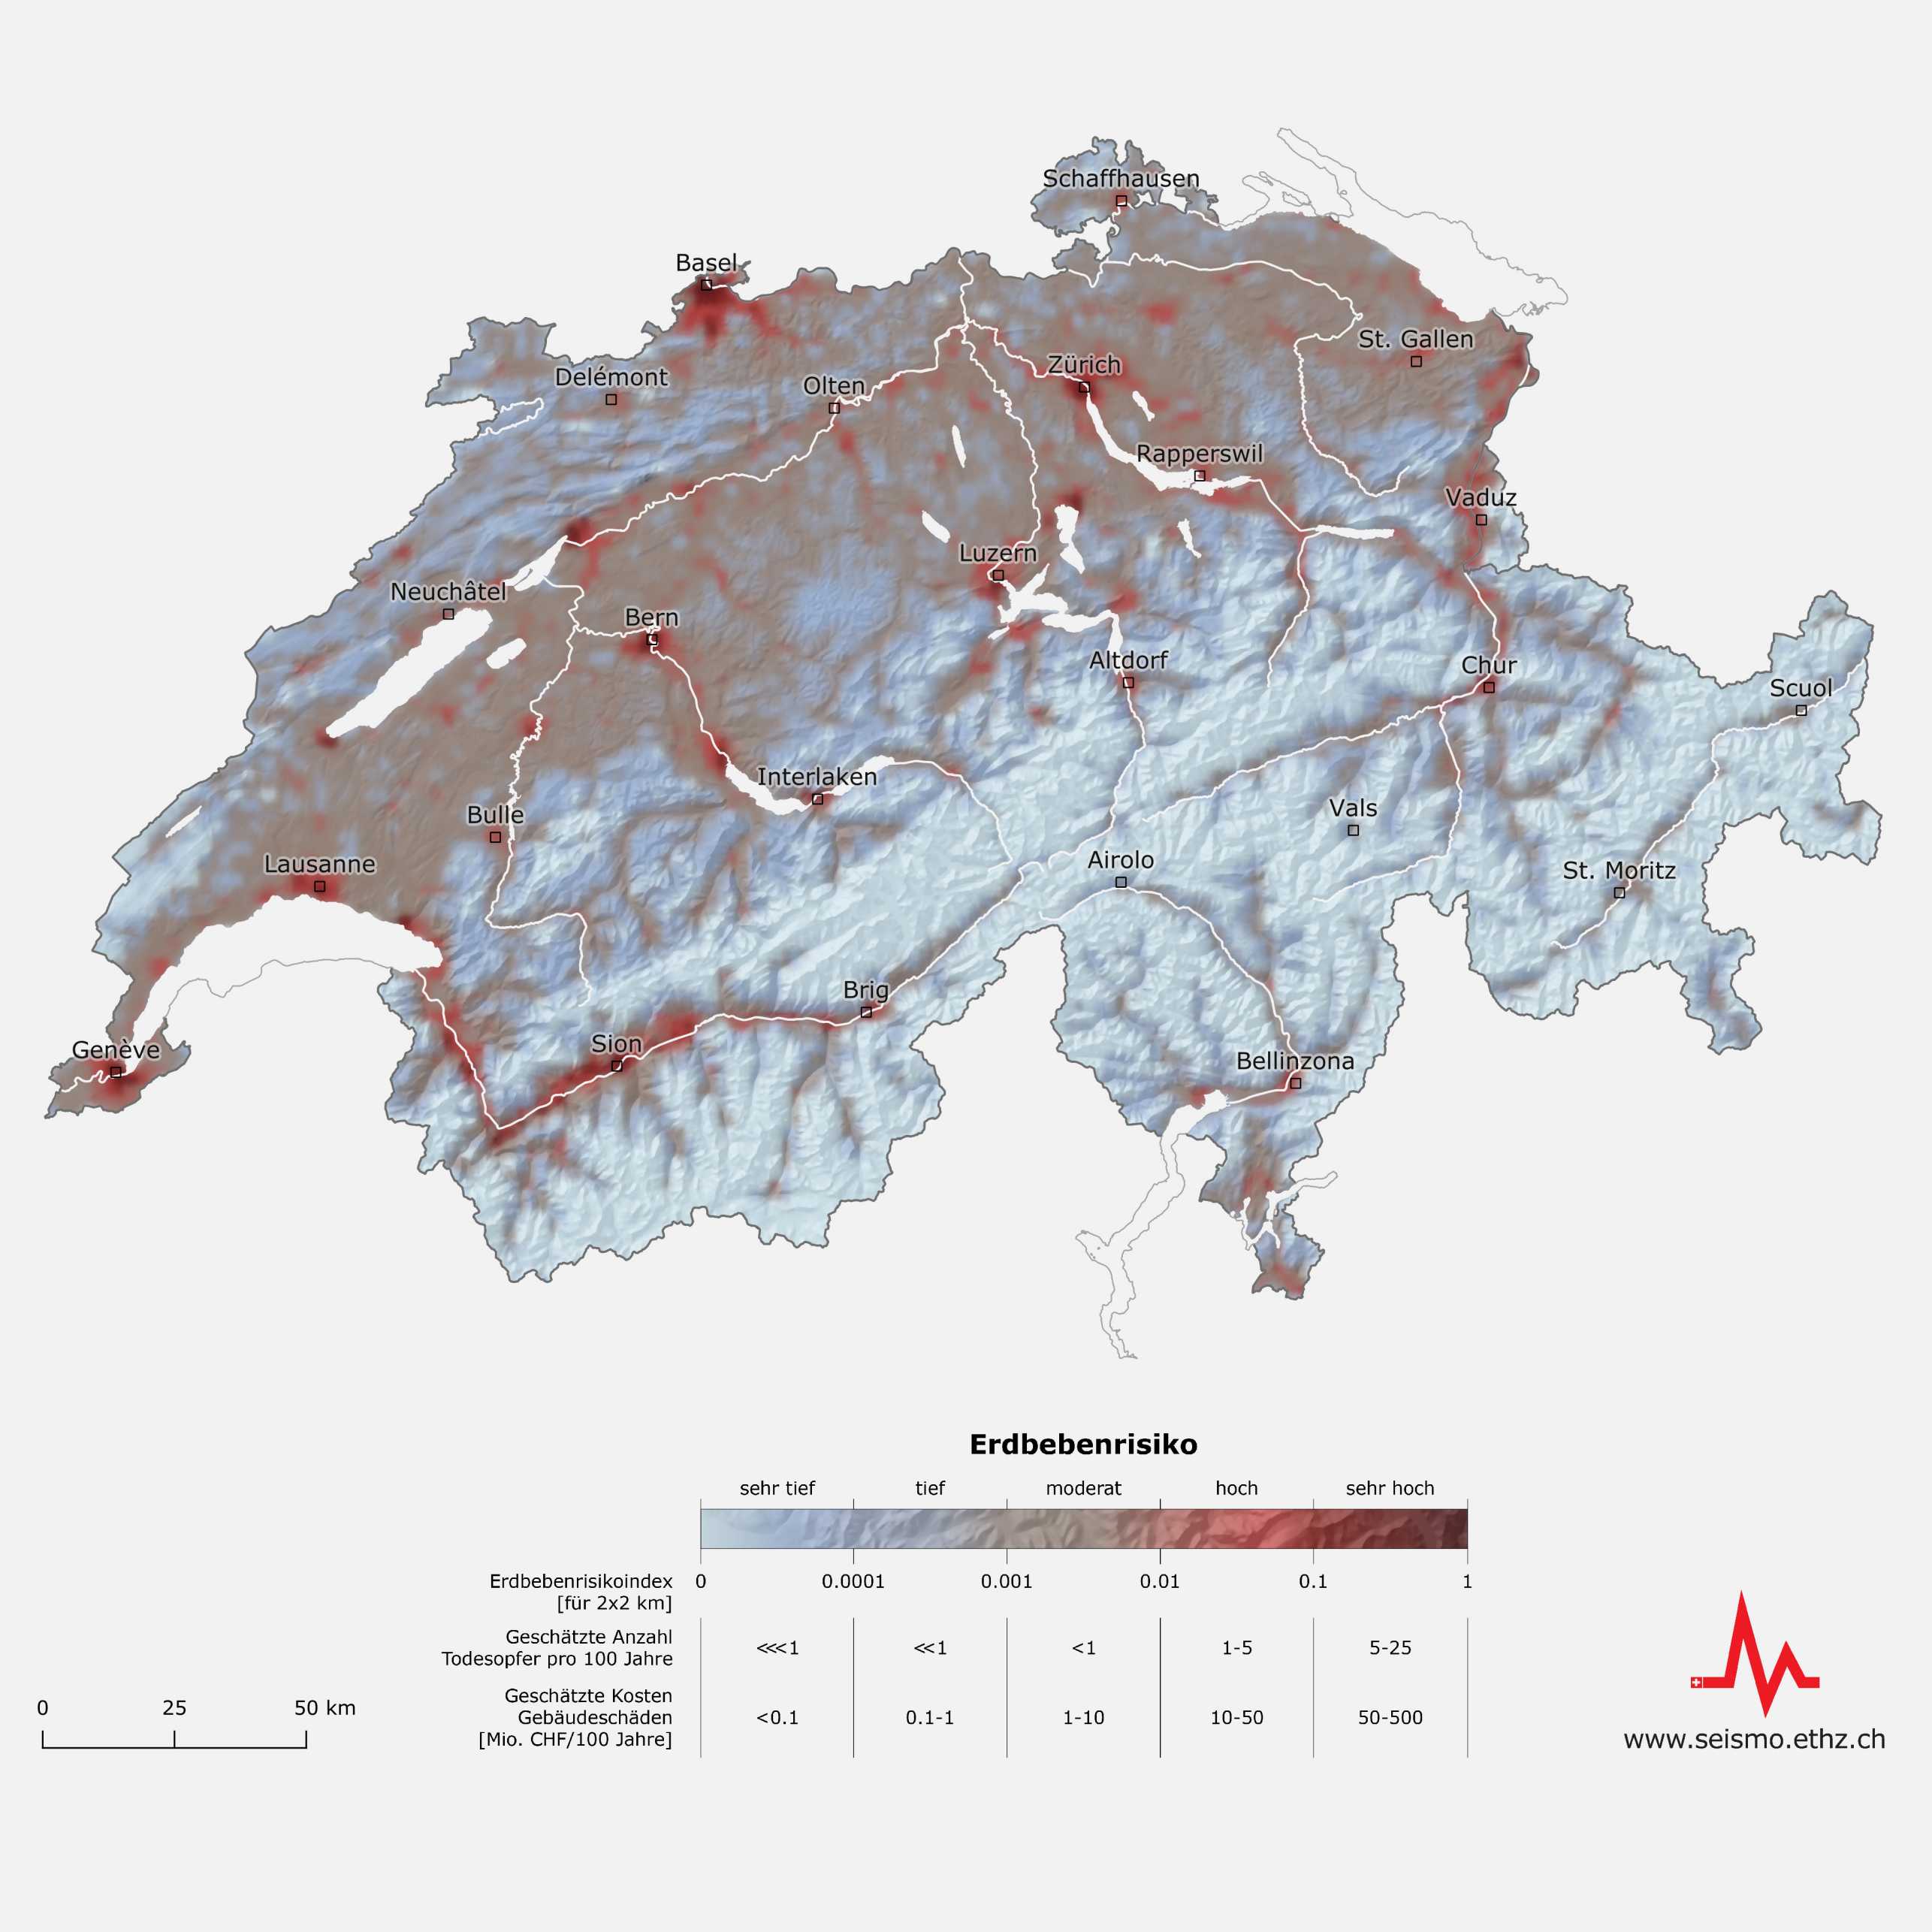 Enlarged view: Earthquake risk map of Switzerland